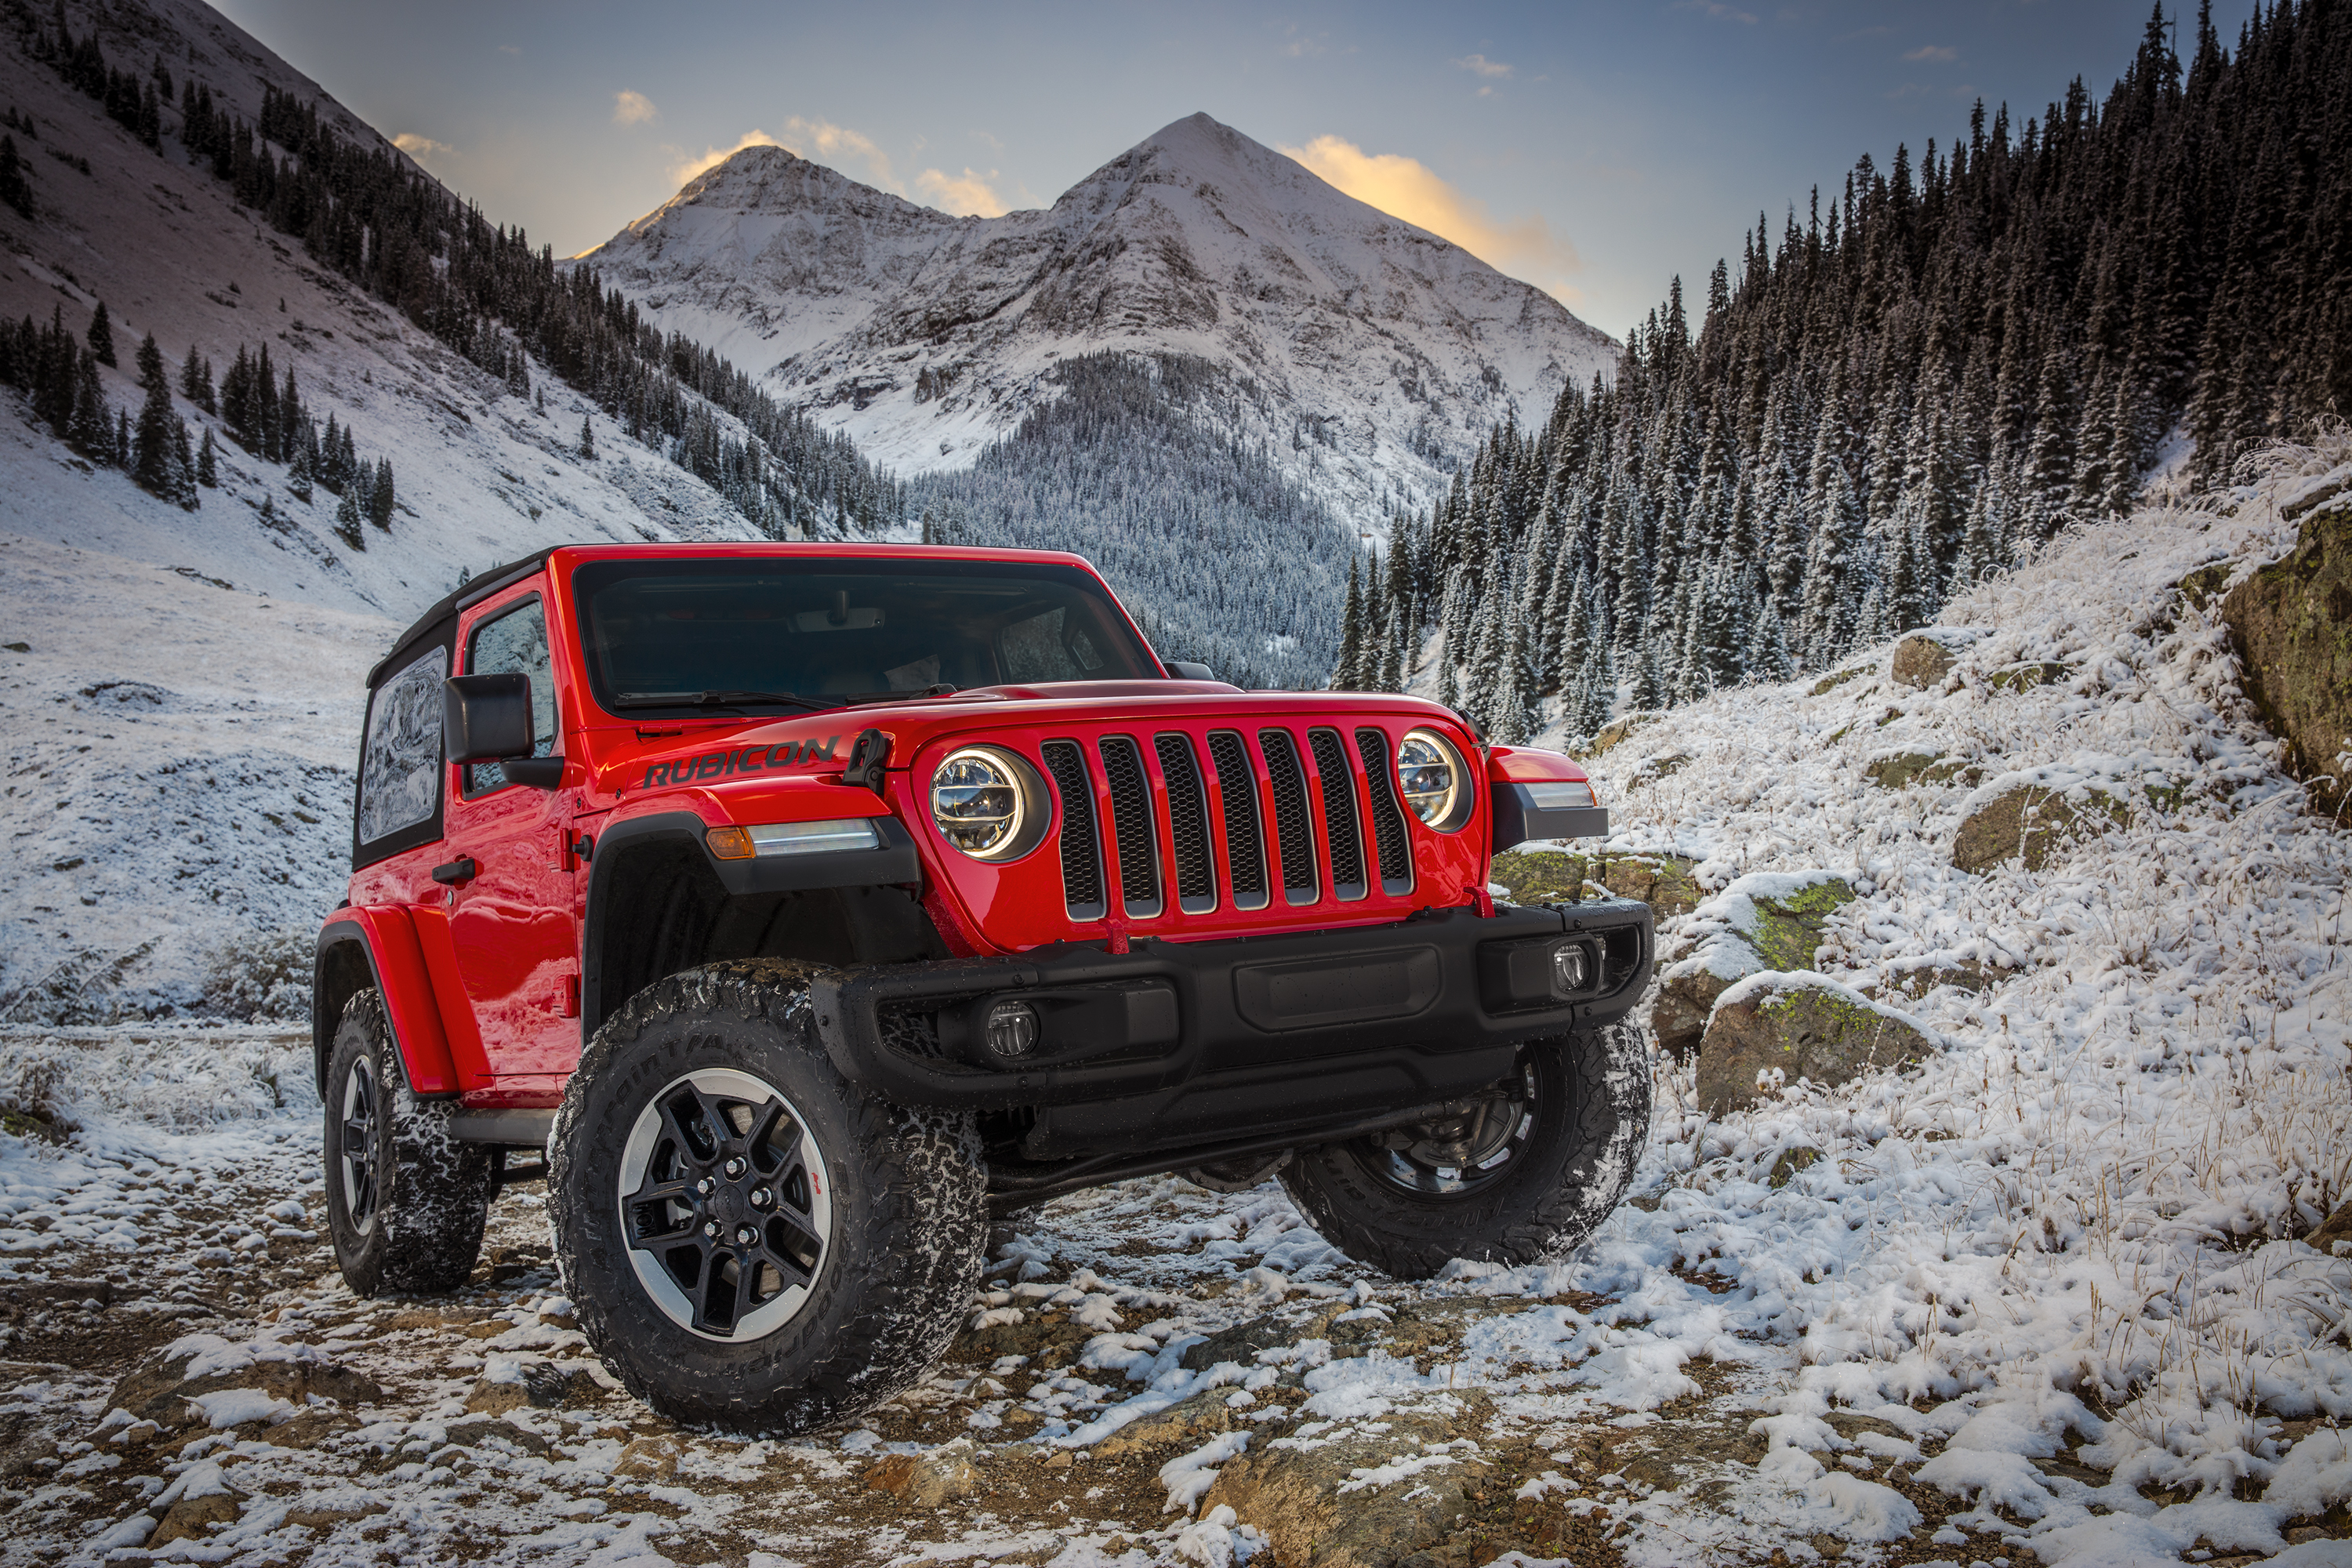 Report: 2018 Jeep Wrangler JL Suffers From Steering Issues, Owners Claim -  The Fast Lane Car